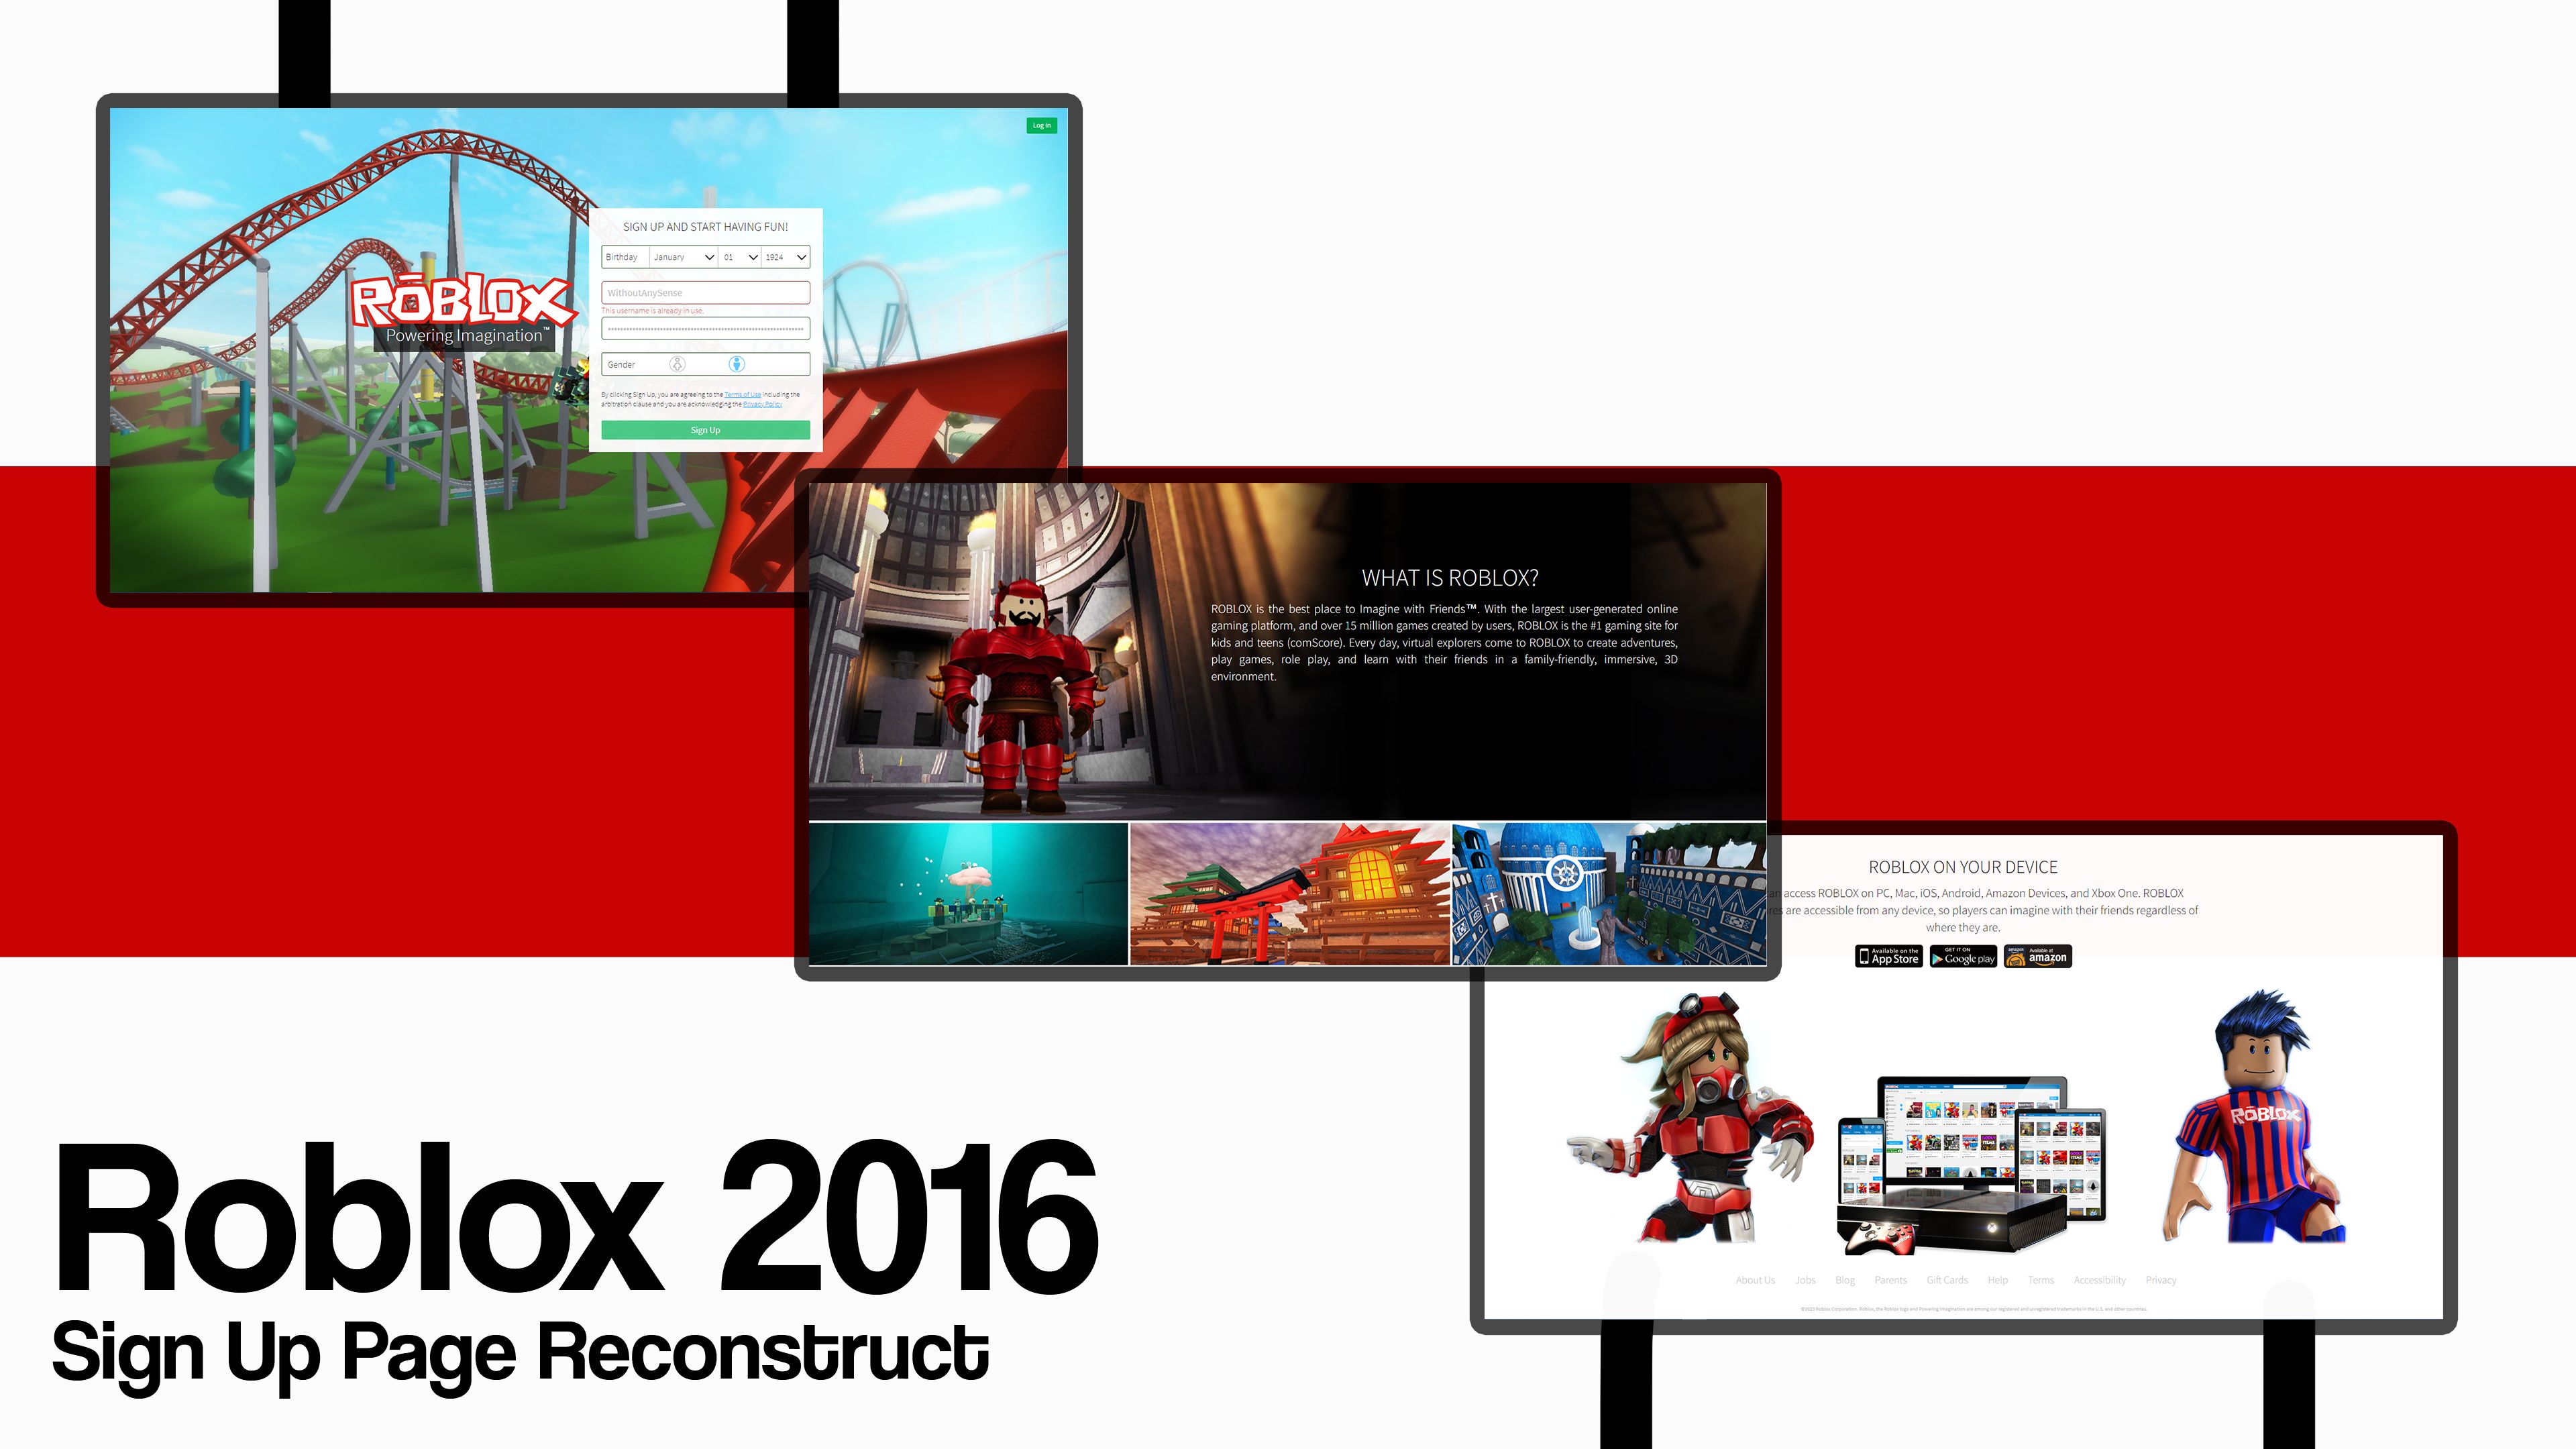 ROBLOX 2016 Sign Up Page Reconstruct —